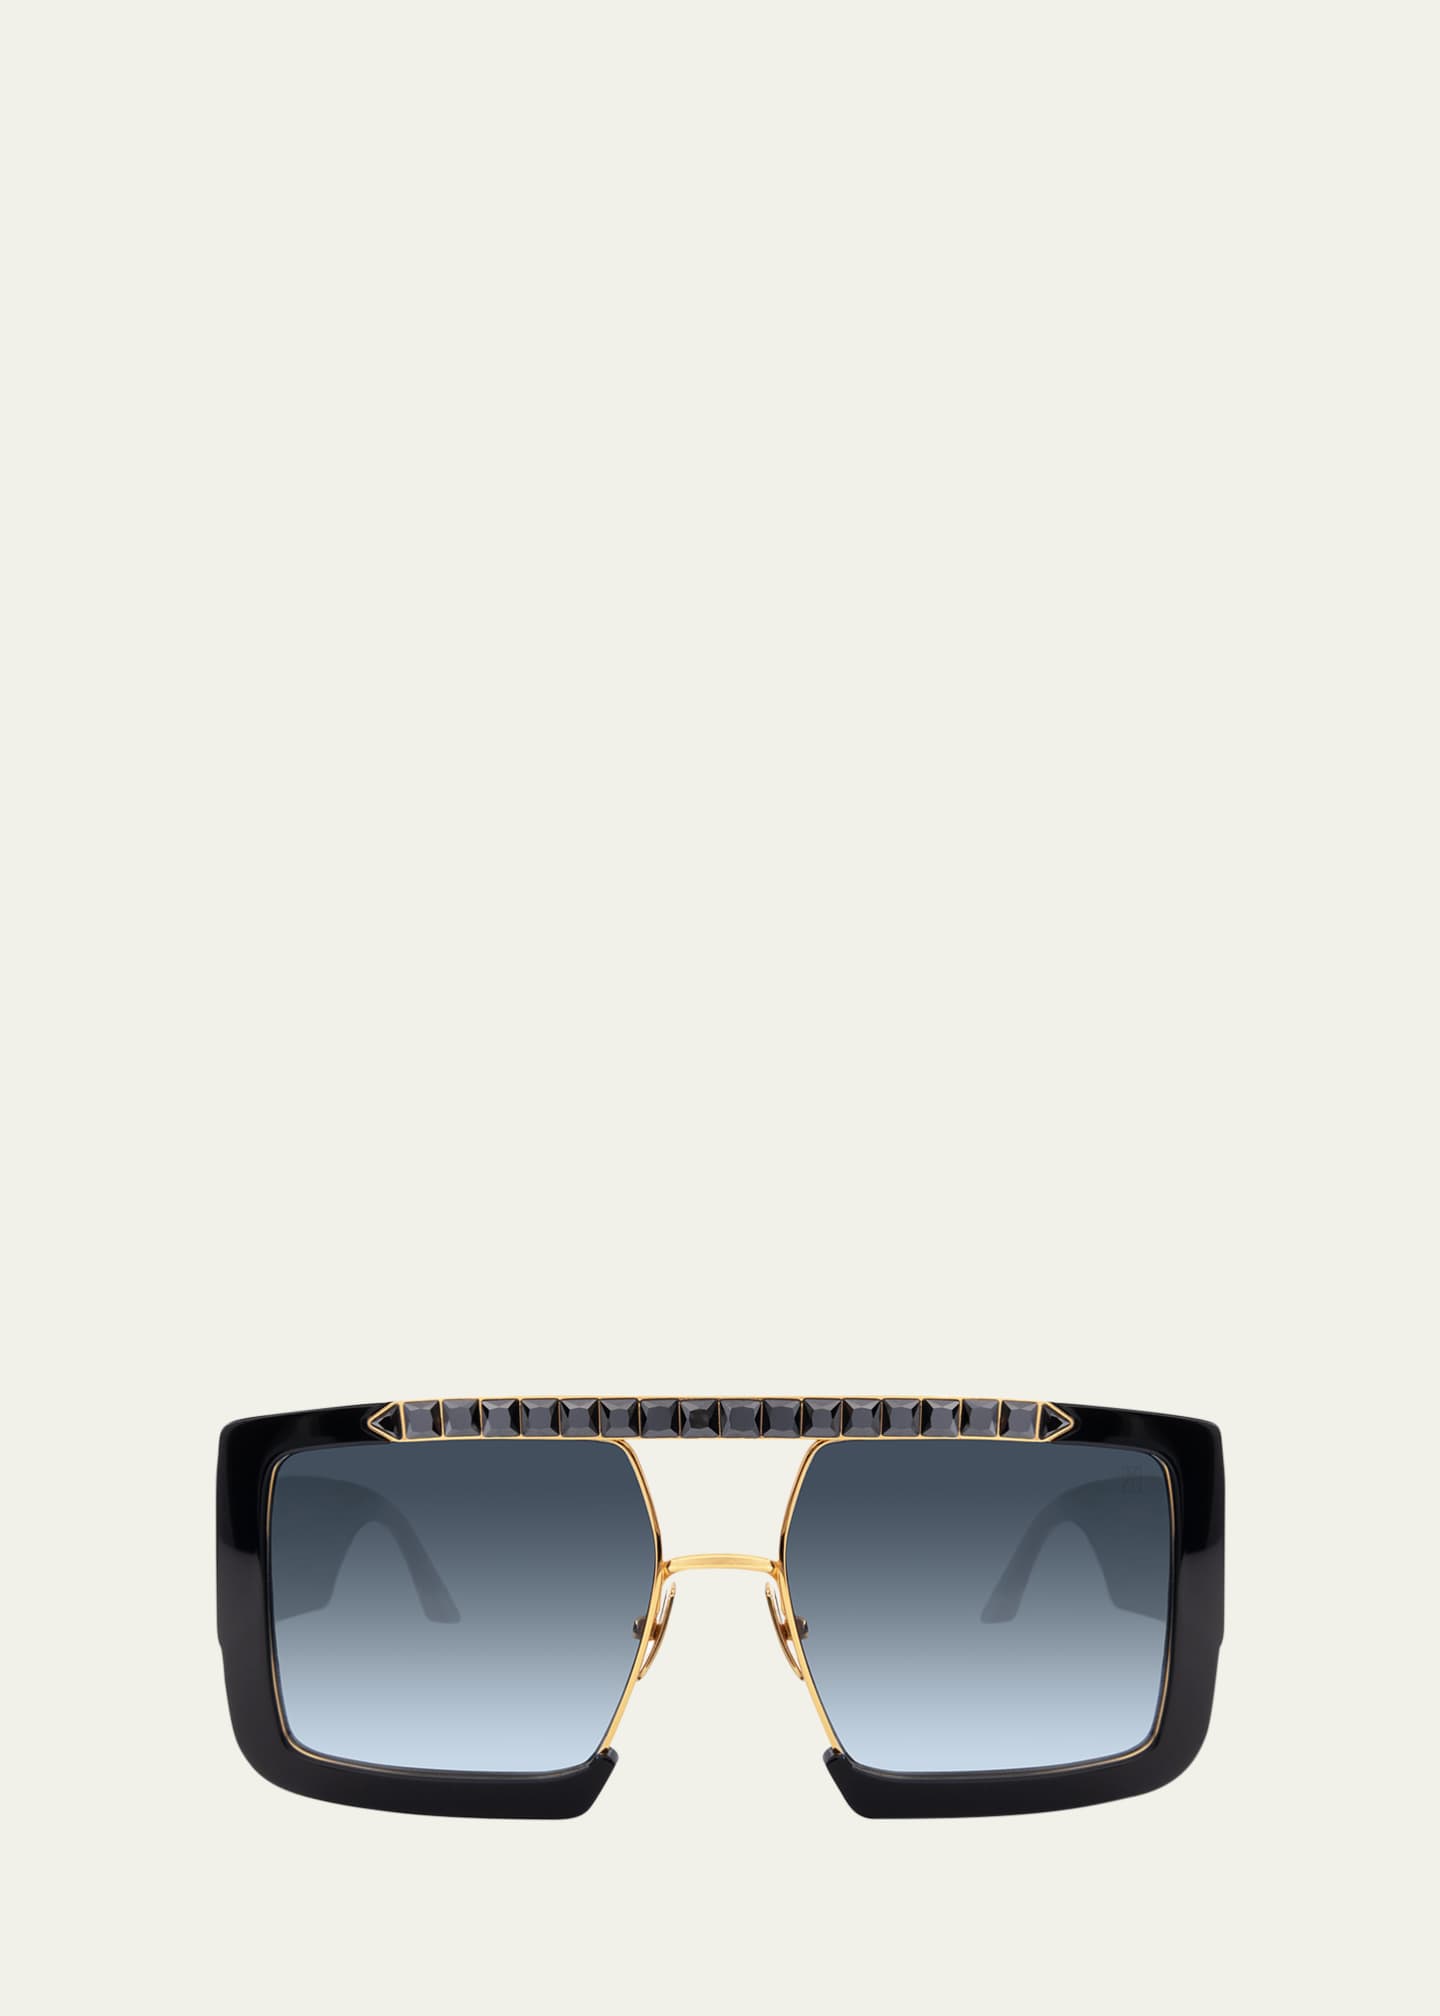 Anna-Karin Karlsson Le Swag Stainless Steel Square-Shaped Aviator ...